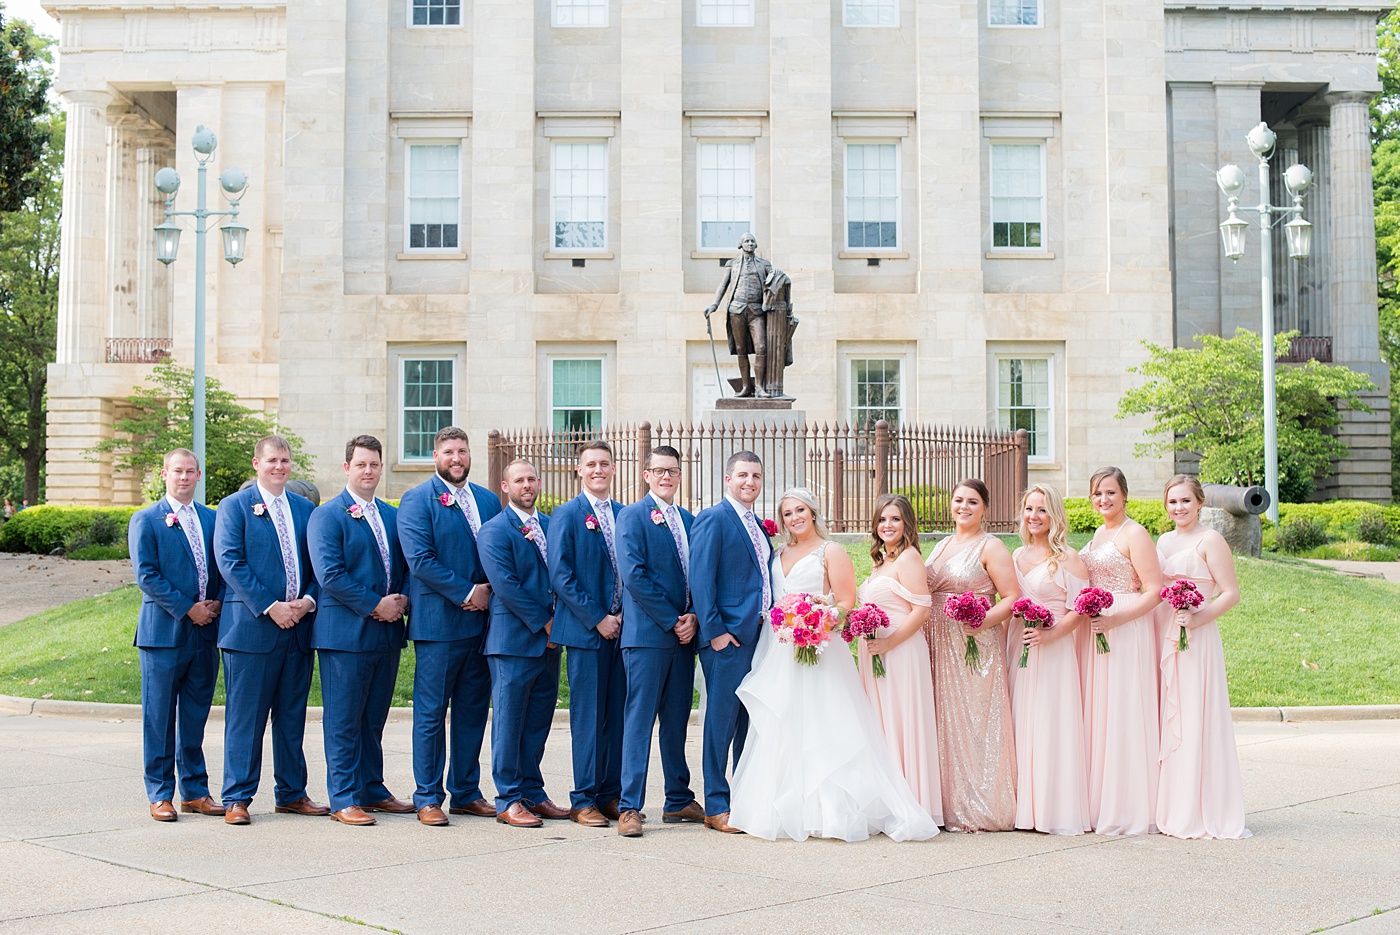 Raleigh wedding photographer, Mikkel Paige Photography, pictures of mismatched pink bridesmaids + groomsmen in blue suits with floral ties in downtown Raleigh, North Carolina at the event venue The Stockroom at 230, The Glass Box, and capital building. Their hot pink peony + carnation bouquets were perfect for a spring May celebration. #MikkelPaige #DowntownRaleigh #RaleighWedding #RaleighVenue #TheStockroomat230 #capitalcity #peonies #carnations #pinkbridesmaids #bridalpartyphotos #weddingparty